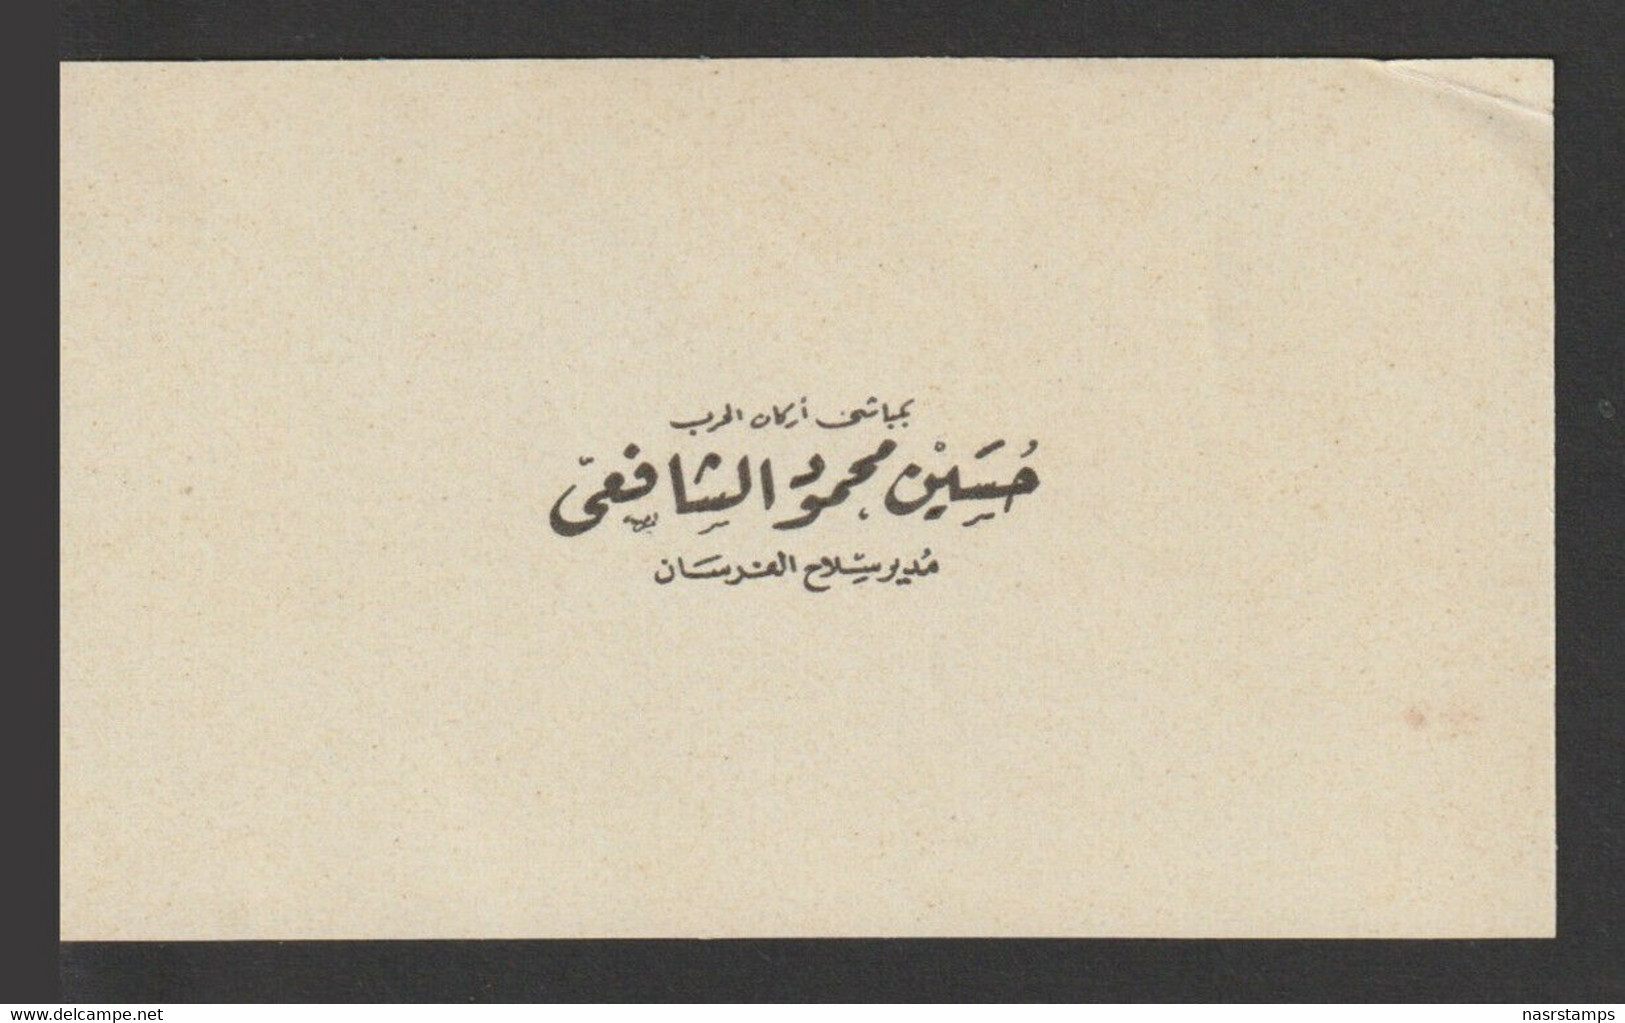 Egypt - Very Rare - Original Greeting Personal Card "Hussain El Shafie" - Lettres & Documents